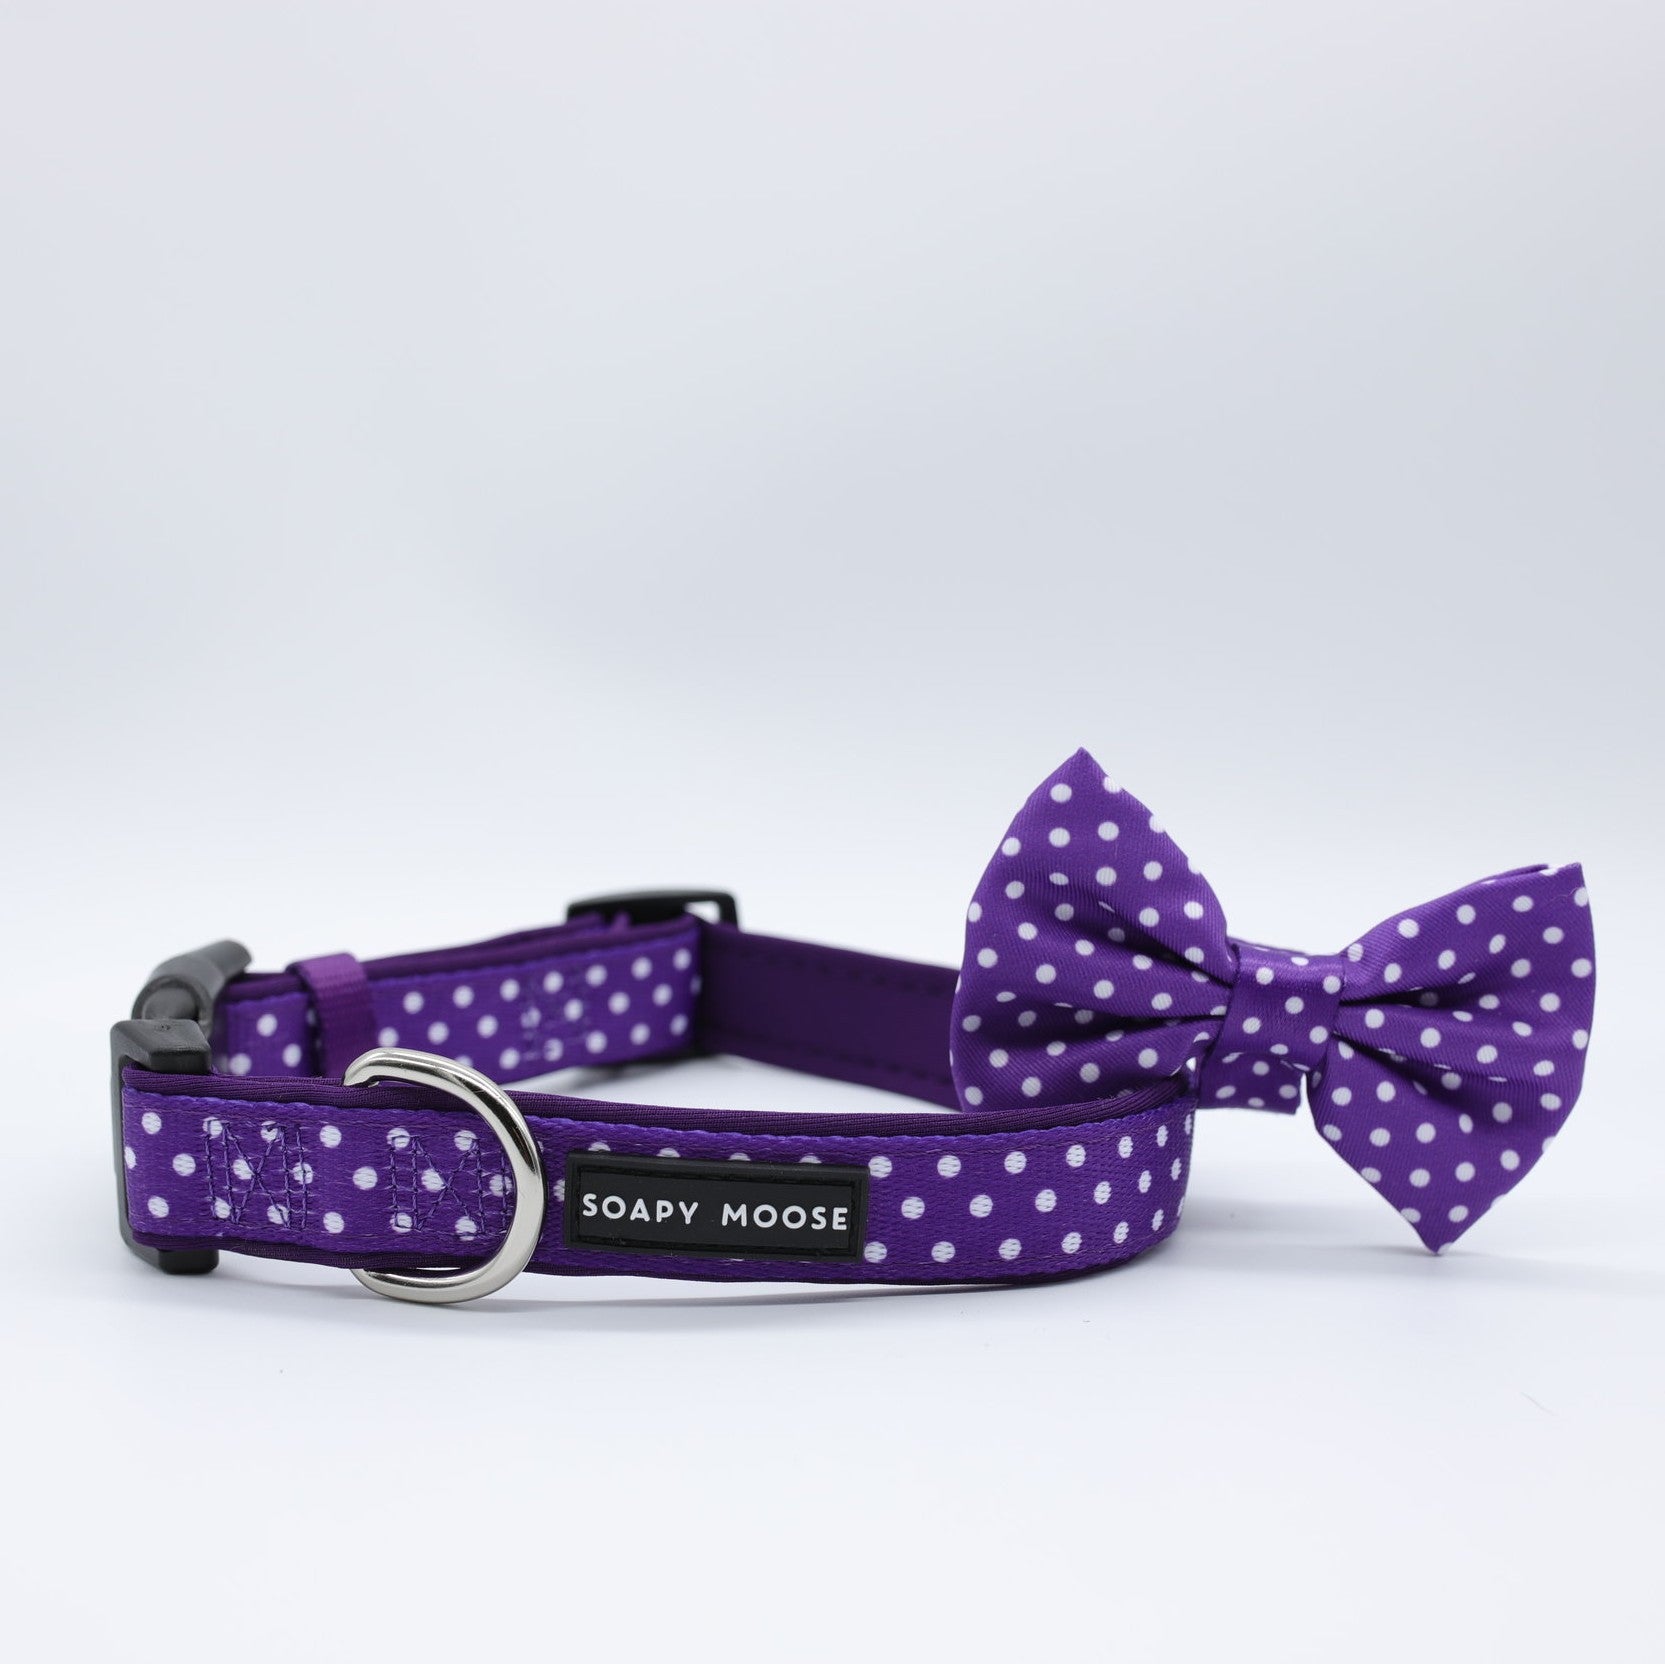 SOAPY MOOSE - Purple & White Polka Dots Collar & Bow Tie